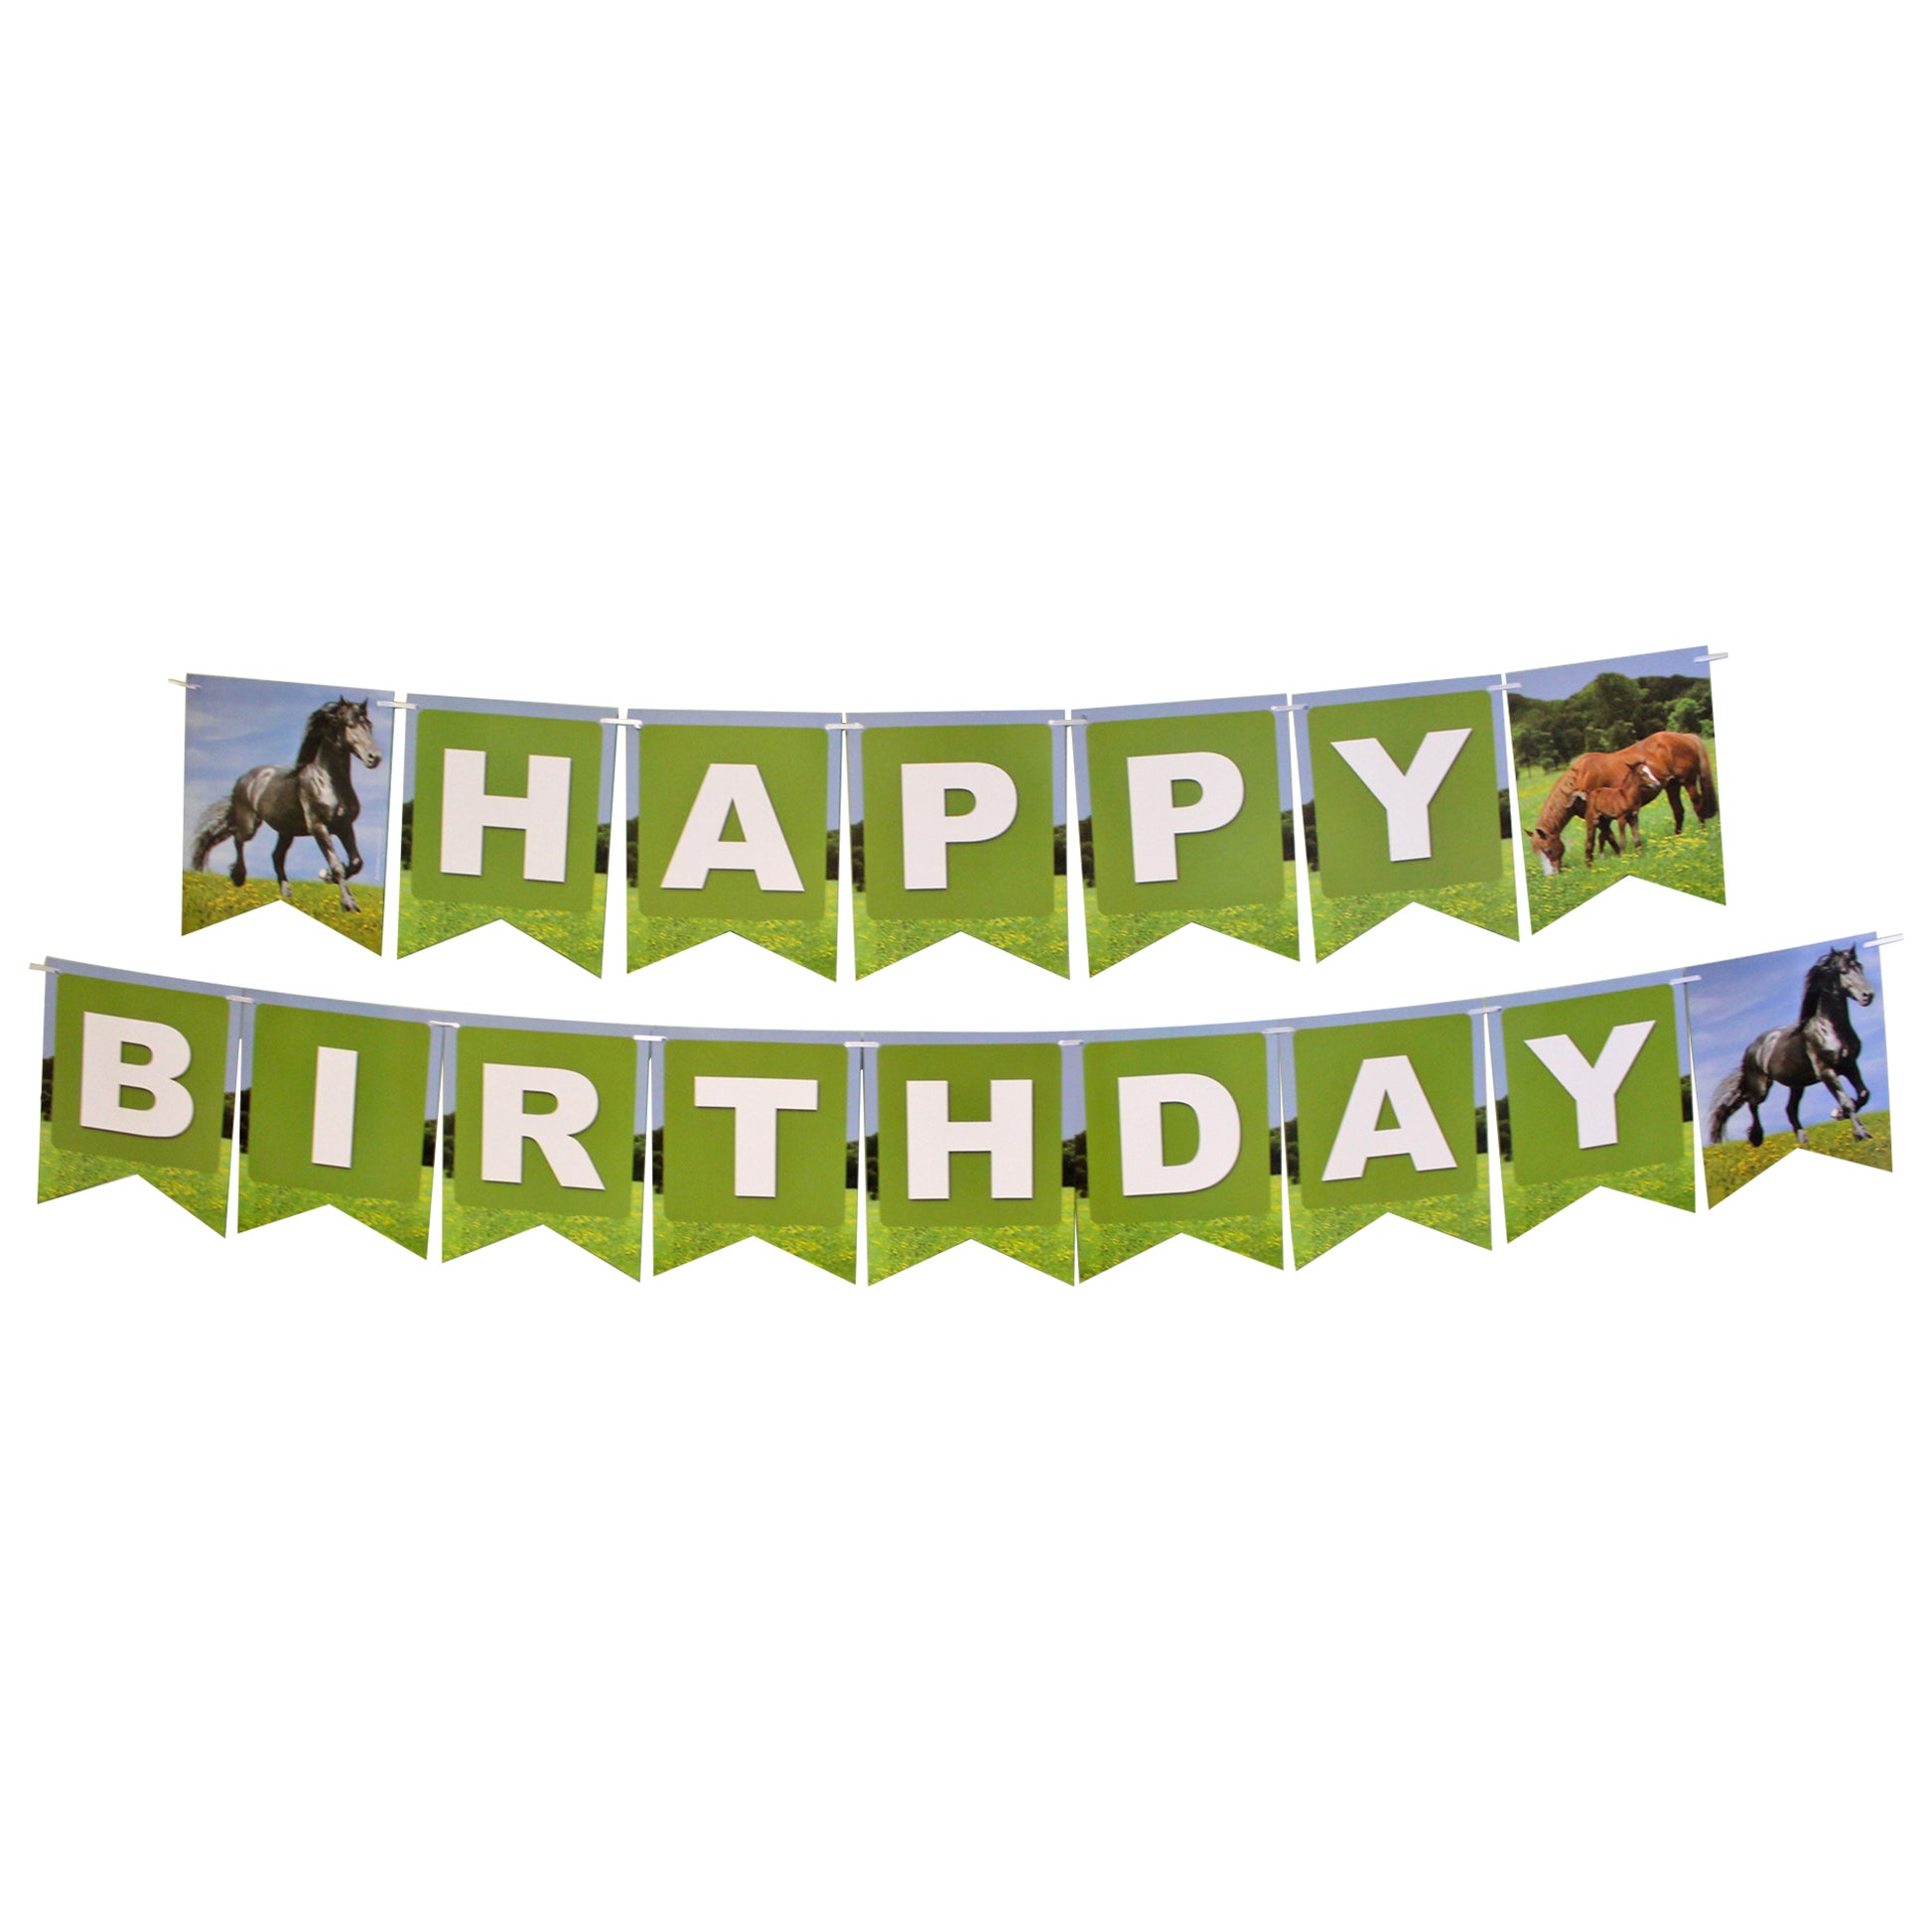 Image of the Horse Party Pack's happy birthday banner, which features a fun and colorful horse design. This banner is a great addition to your equestrian-themed party or celebration and is sure to delight your guests. The banner is easy to hang and can be used indoors.